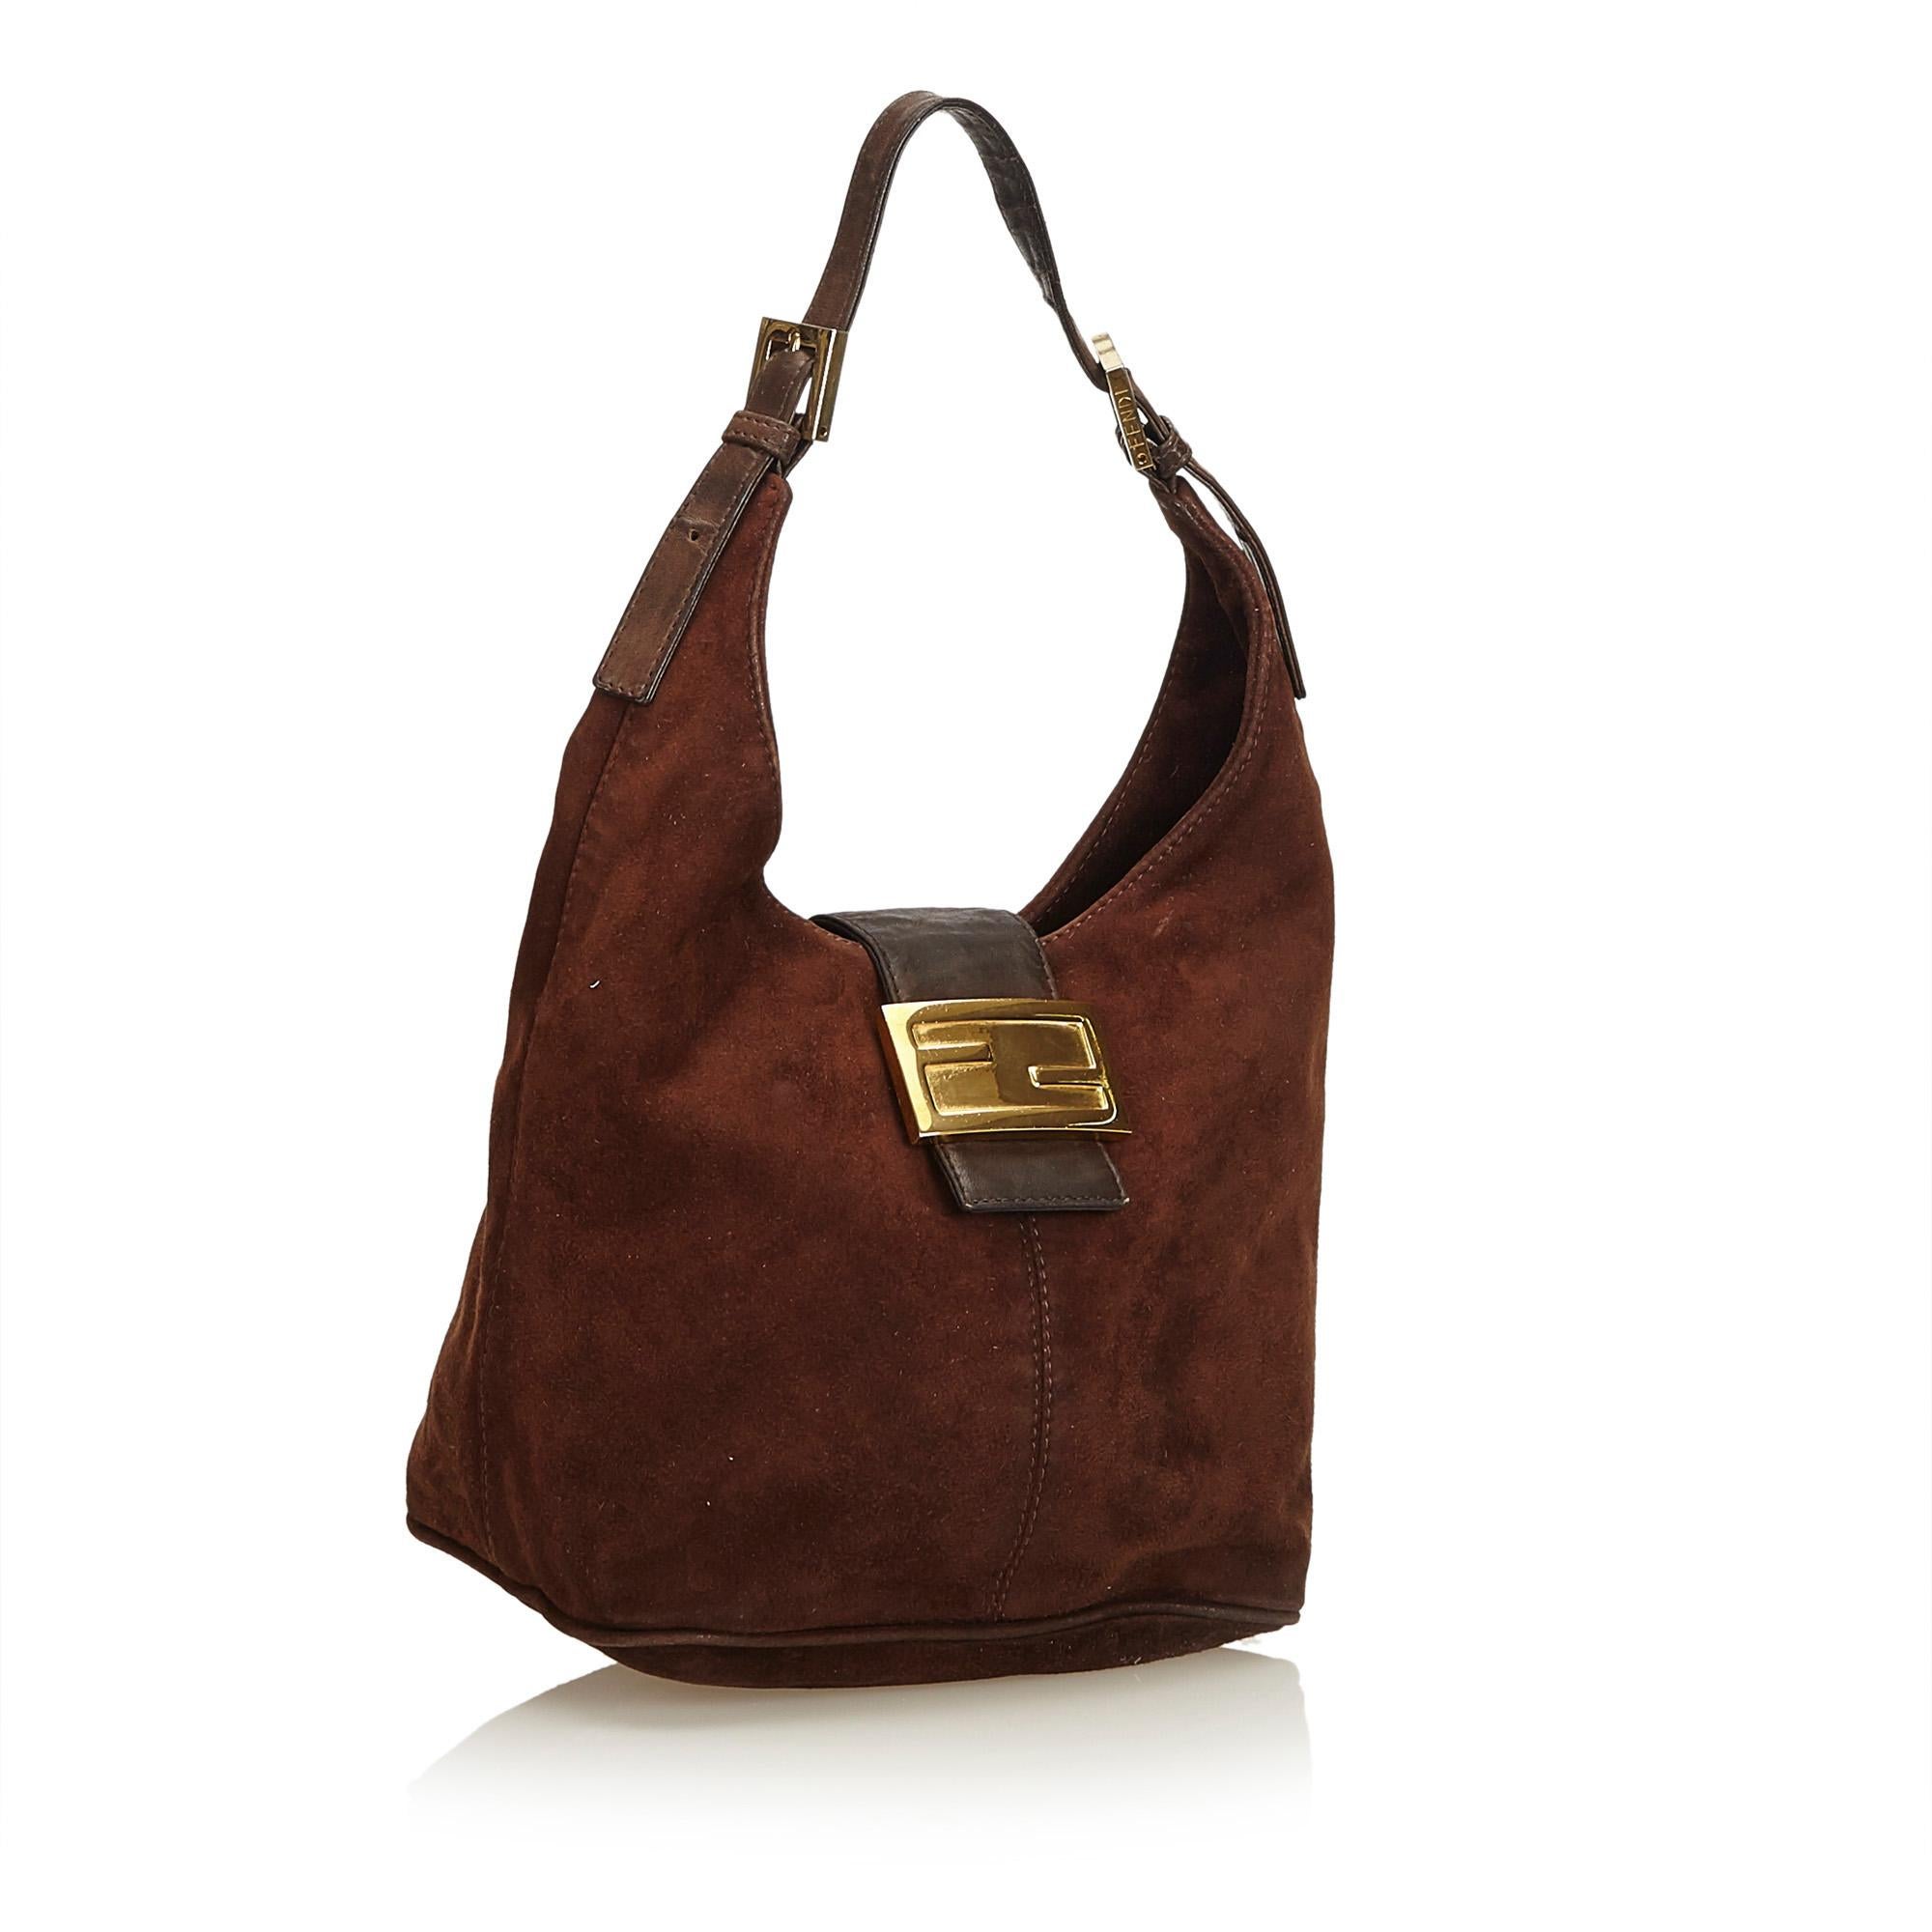 This hobo bag features a suede body with leather trim, flat leather strap, open top with flat leather strap and magnetic closure, and interior zip pocket. It carries as B+ condition rating.

Inclusions: 
This item does not come with